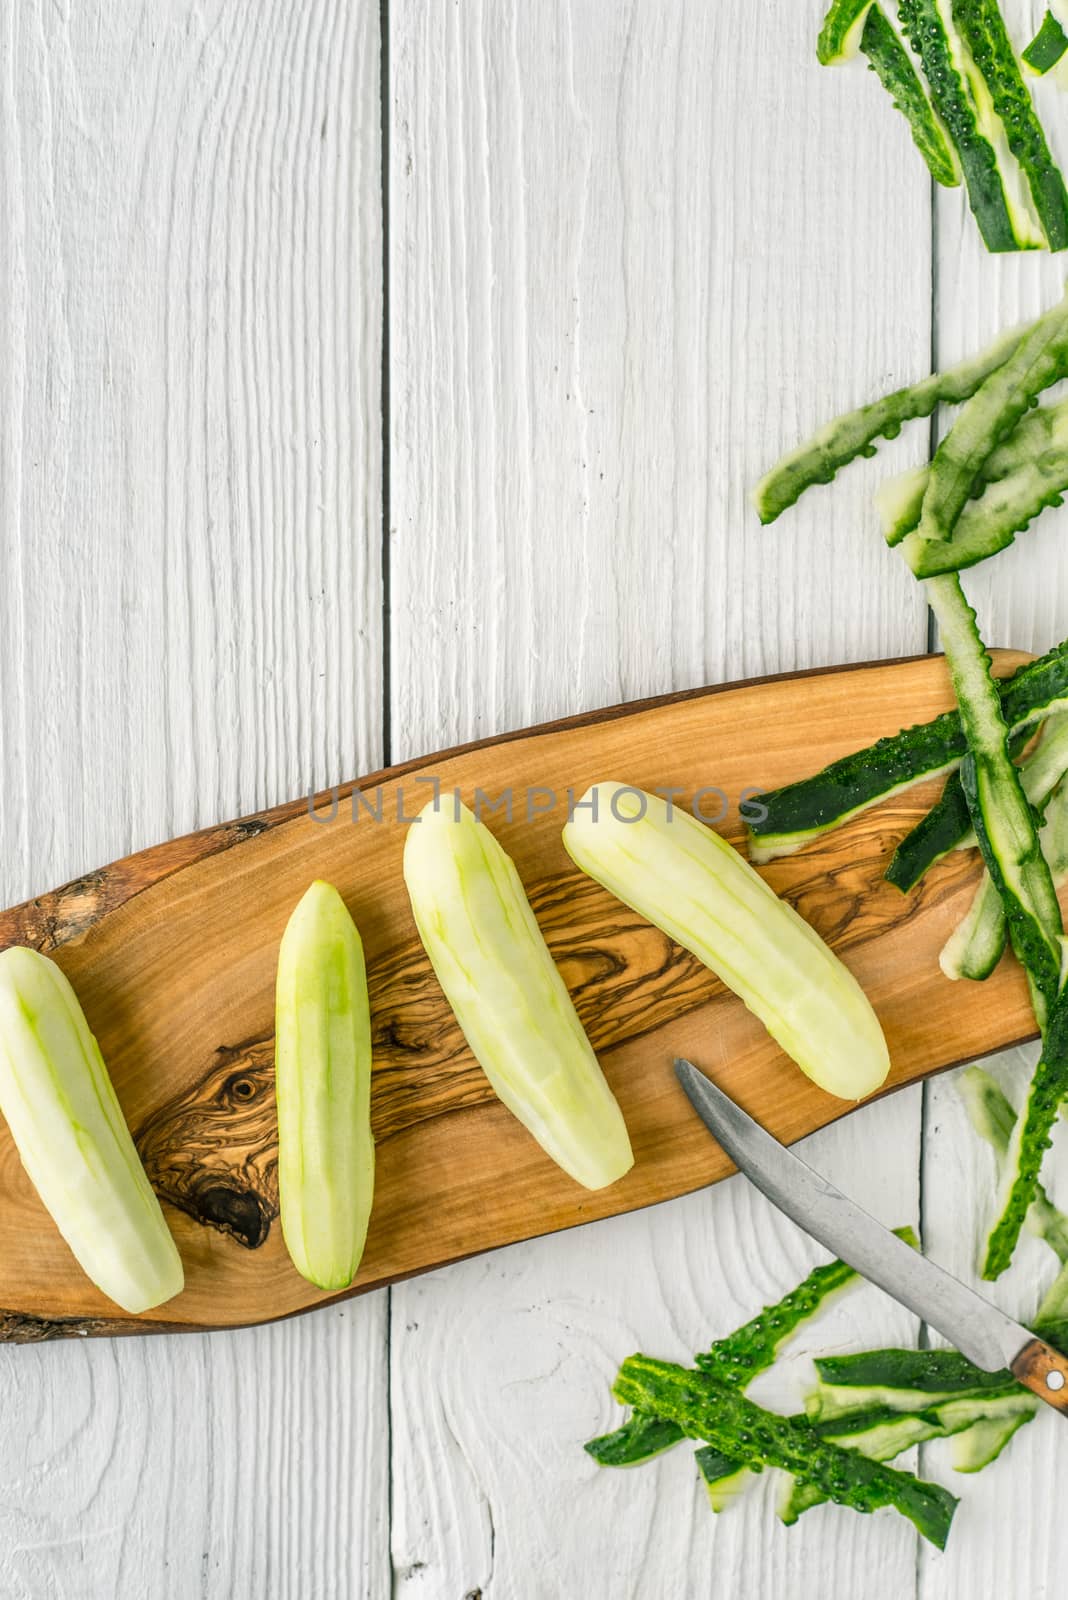 Peeled cucumbers on the wooden board  on the white table vertical